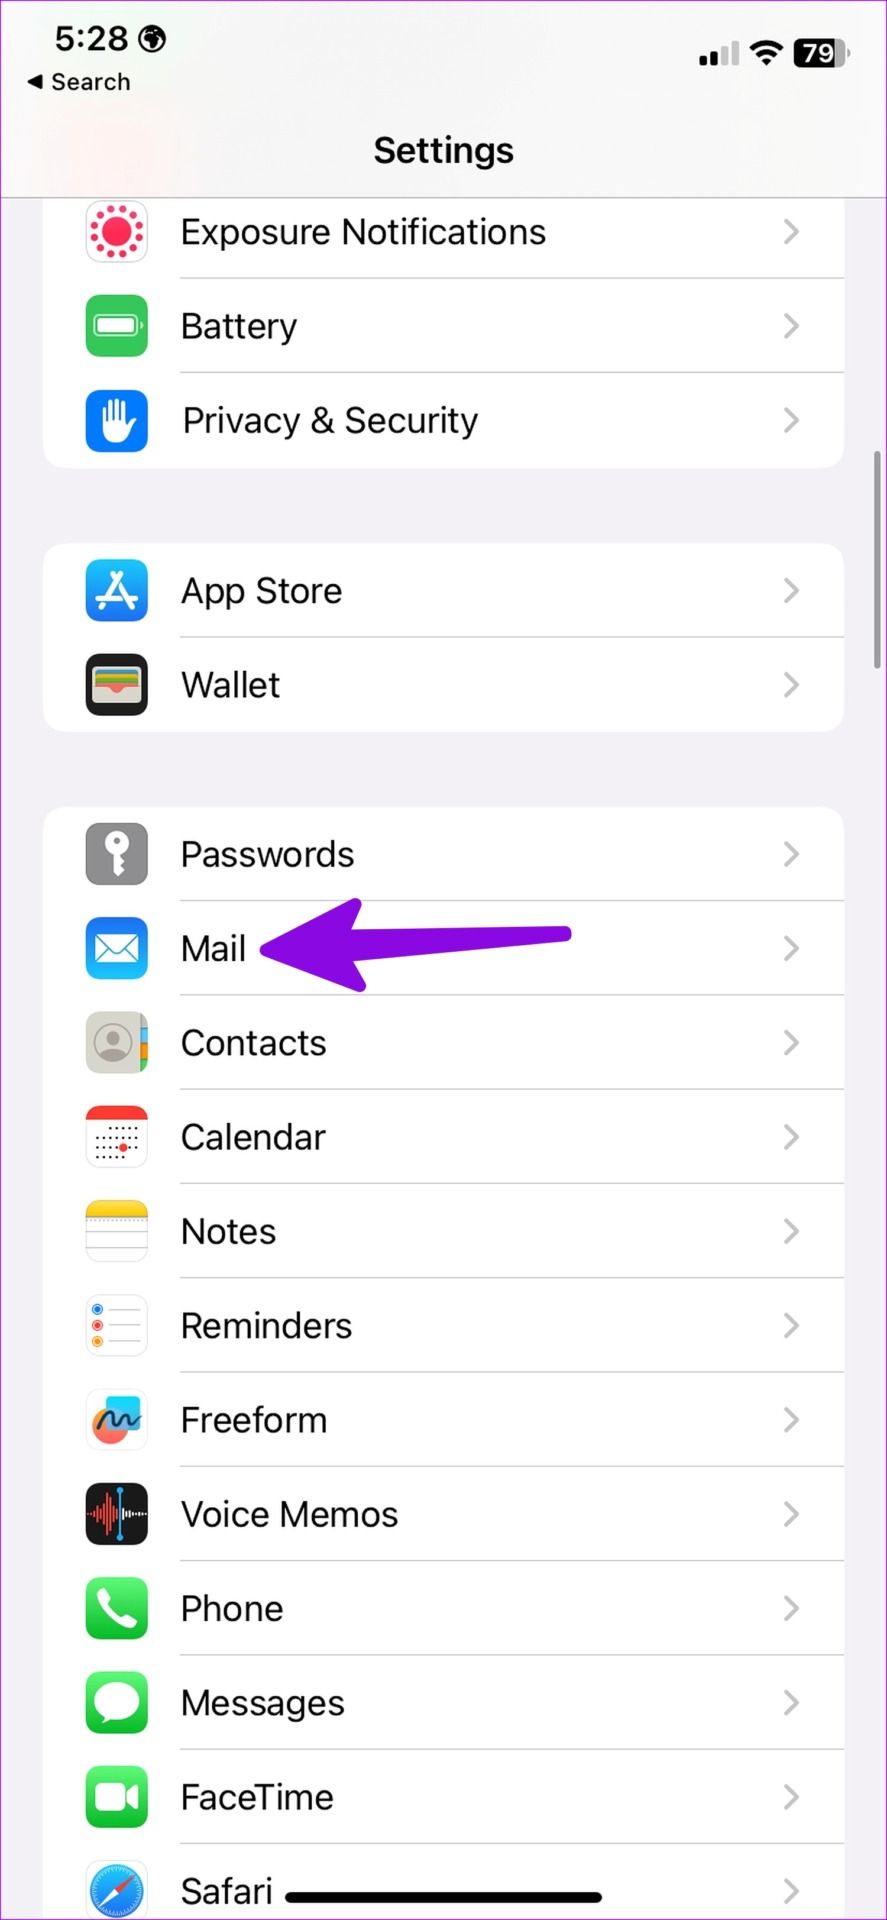 Open Mail app on iPhone